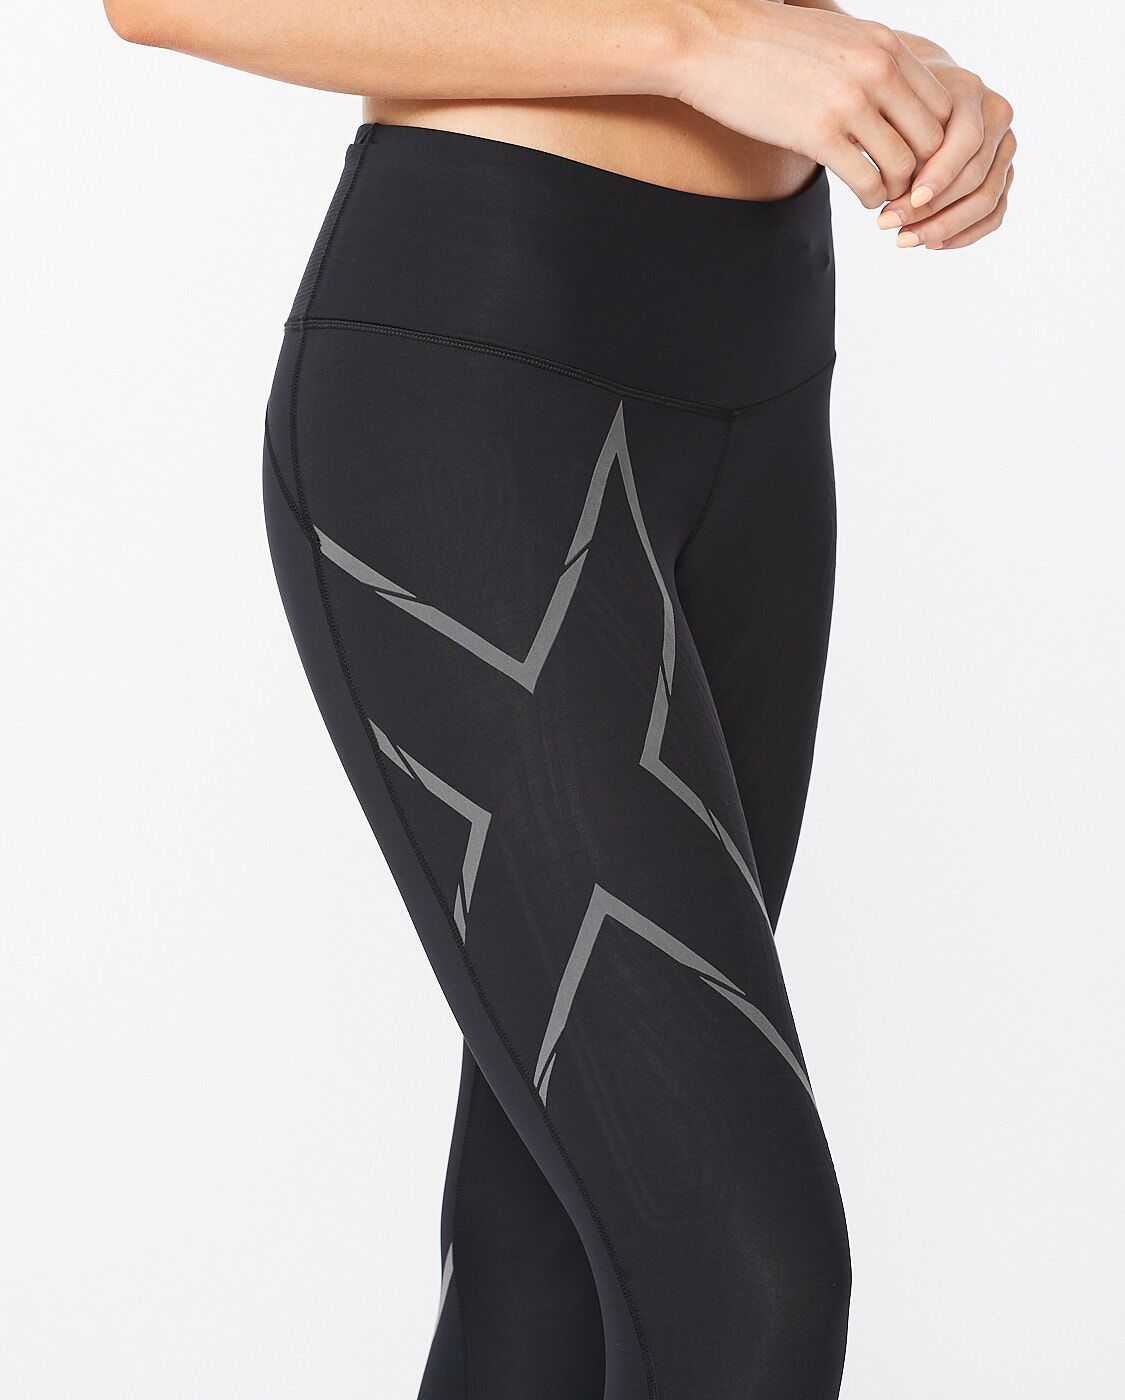 2XU South Africa - Women's Light Speed Mid-Rise Compression Tights - Black/Black Reflective